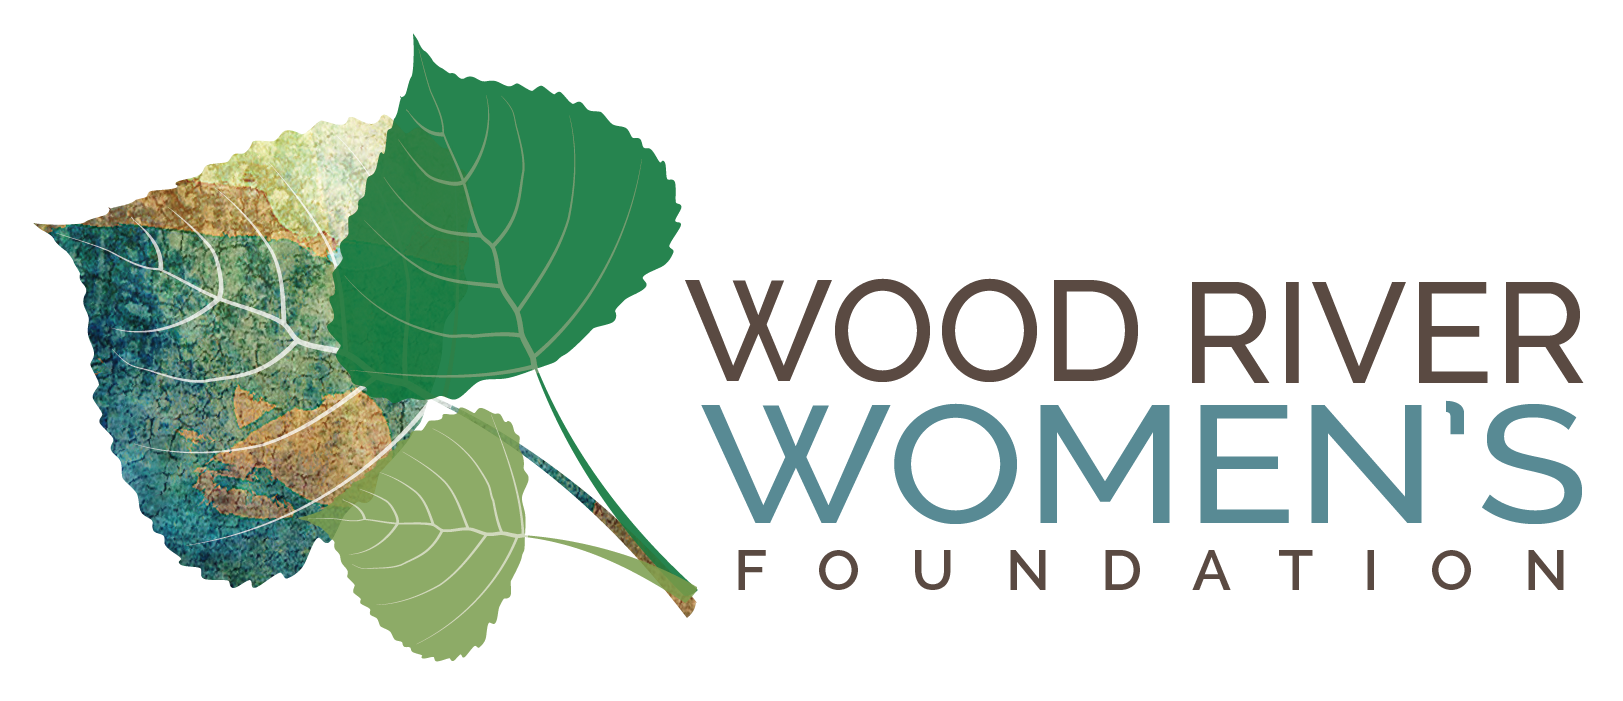 Wood River Womens Foundation